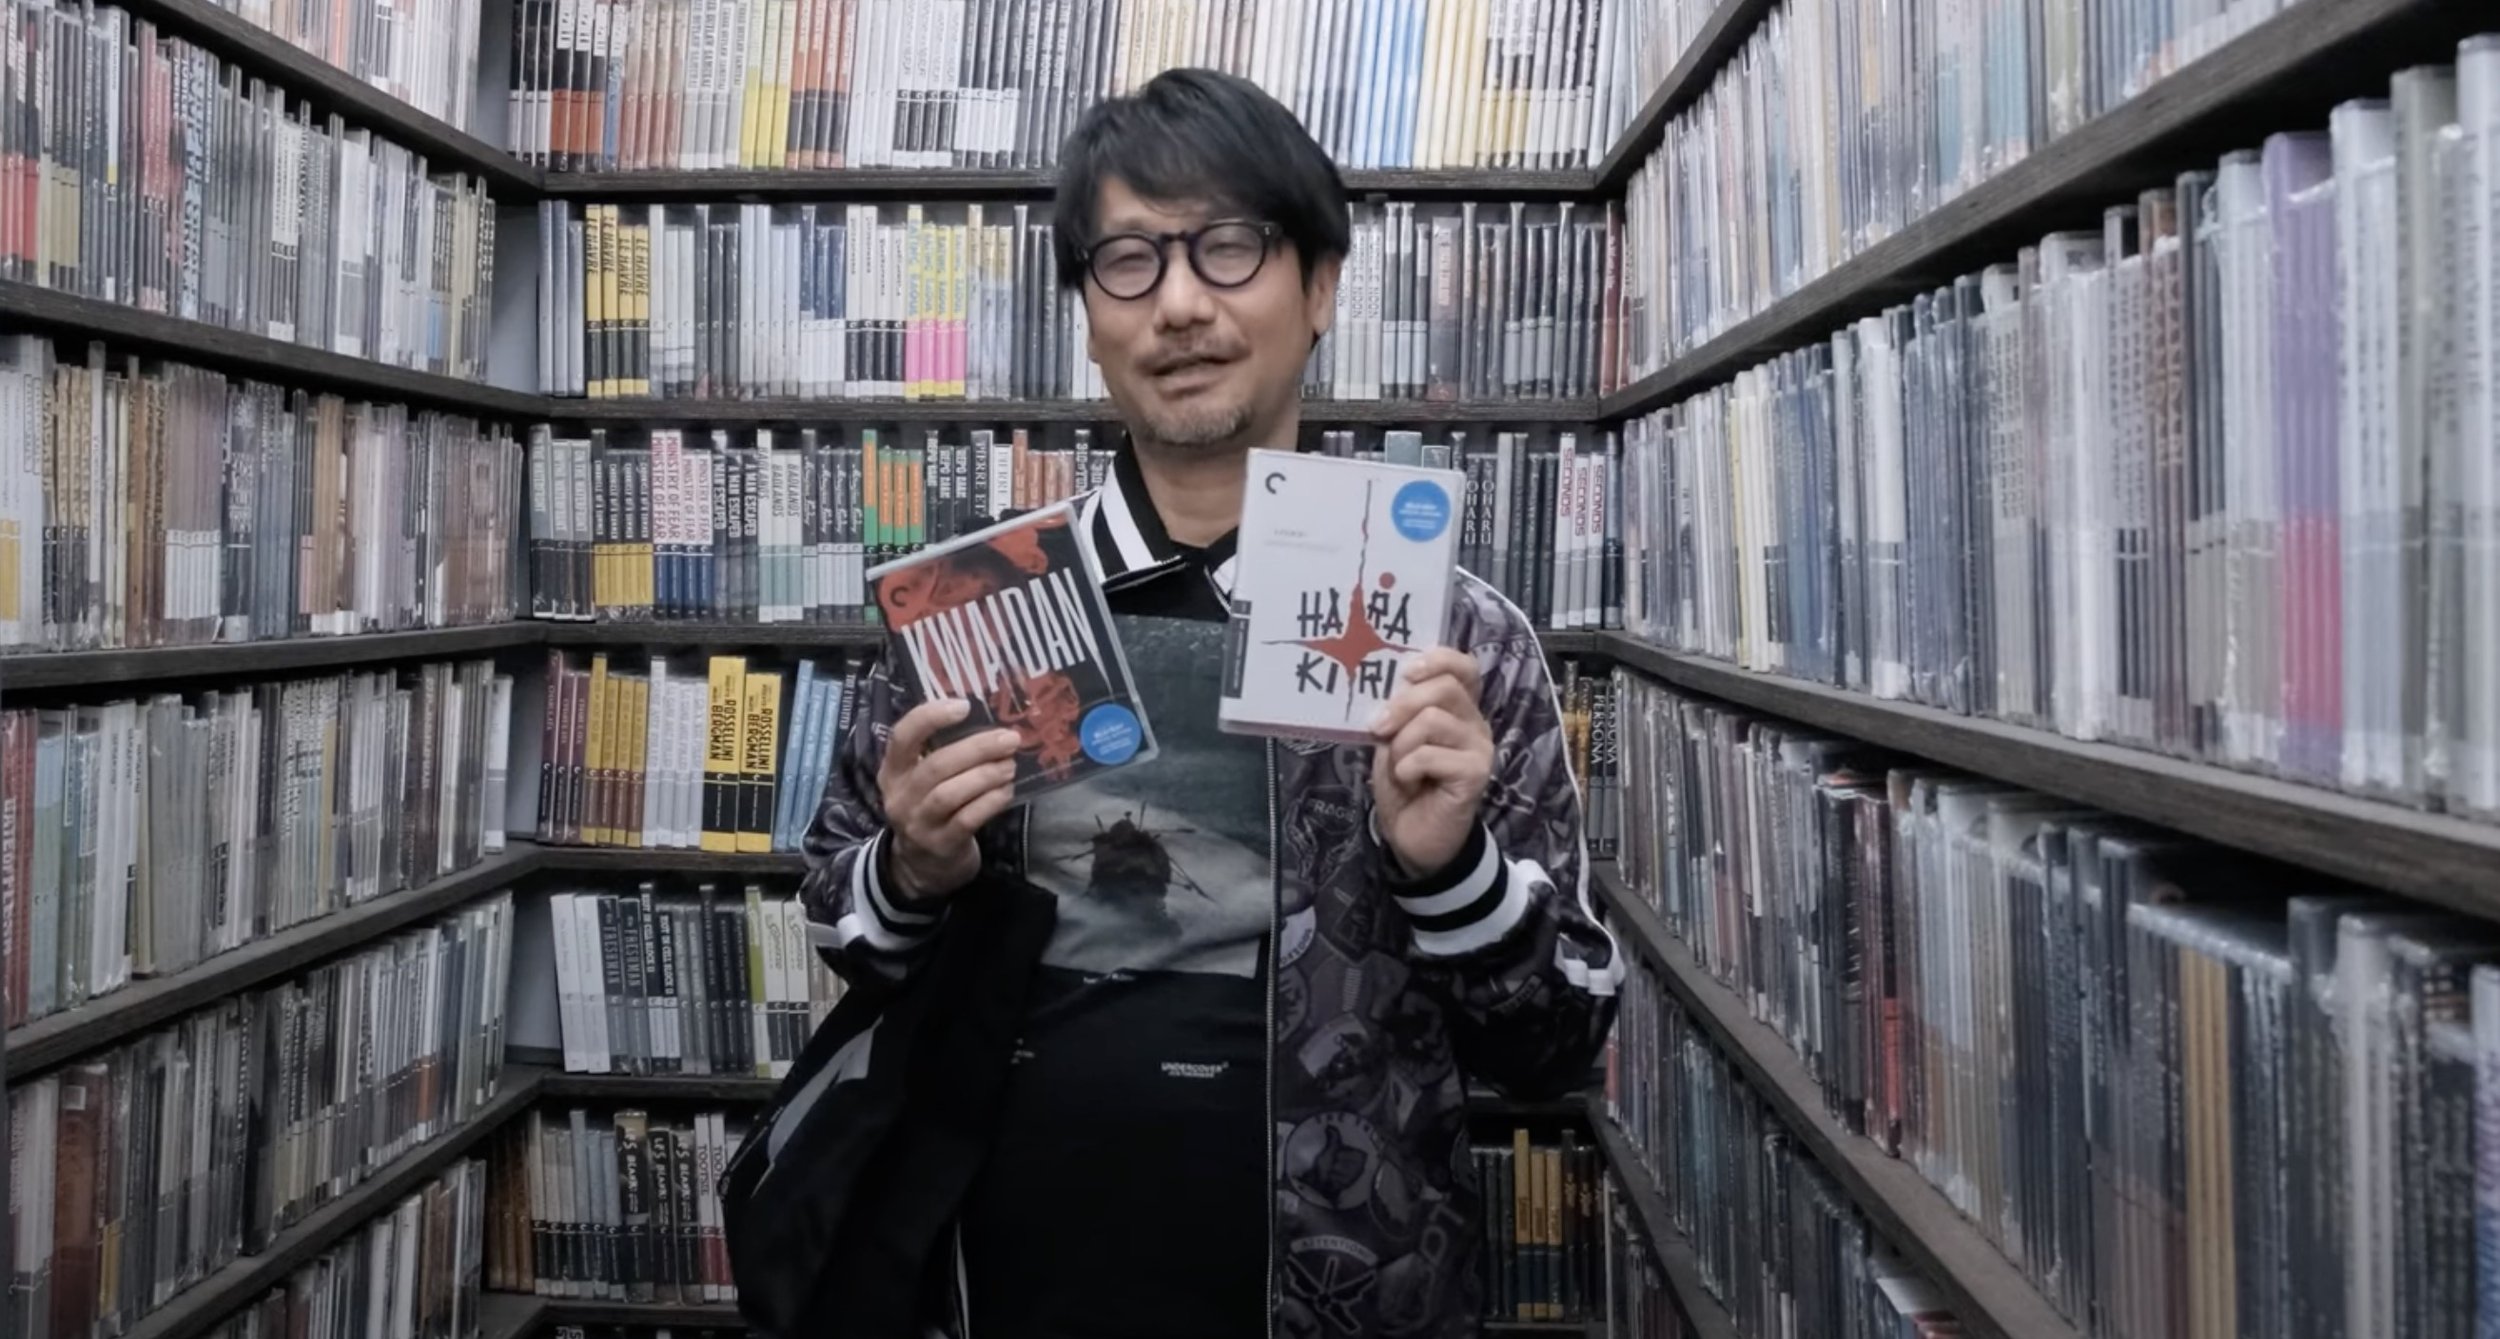 Hideo Kojima Fans Reveal Their Most Favorite Trailer from the